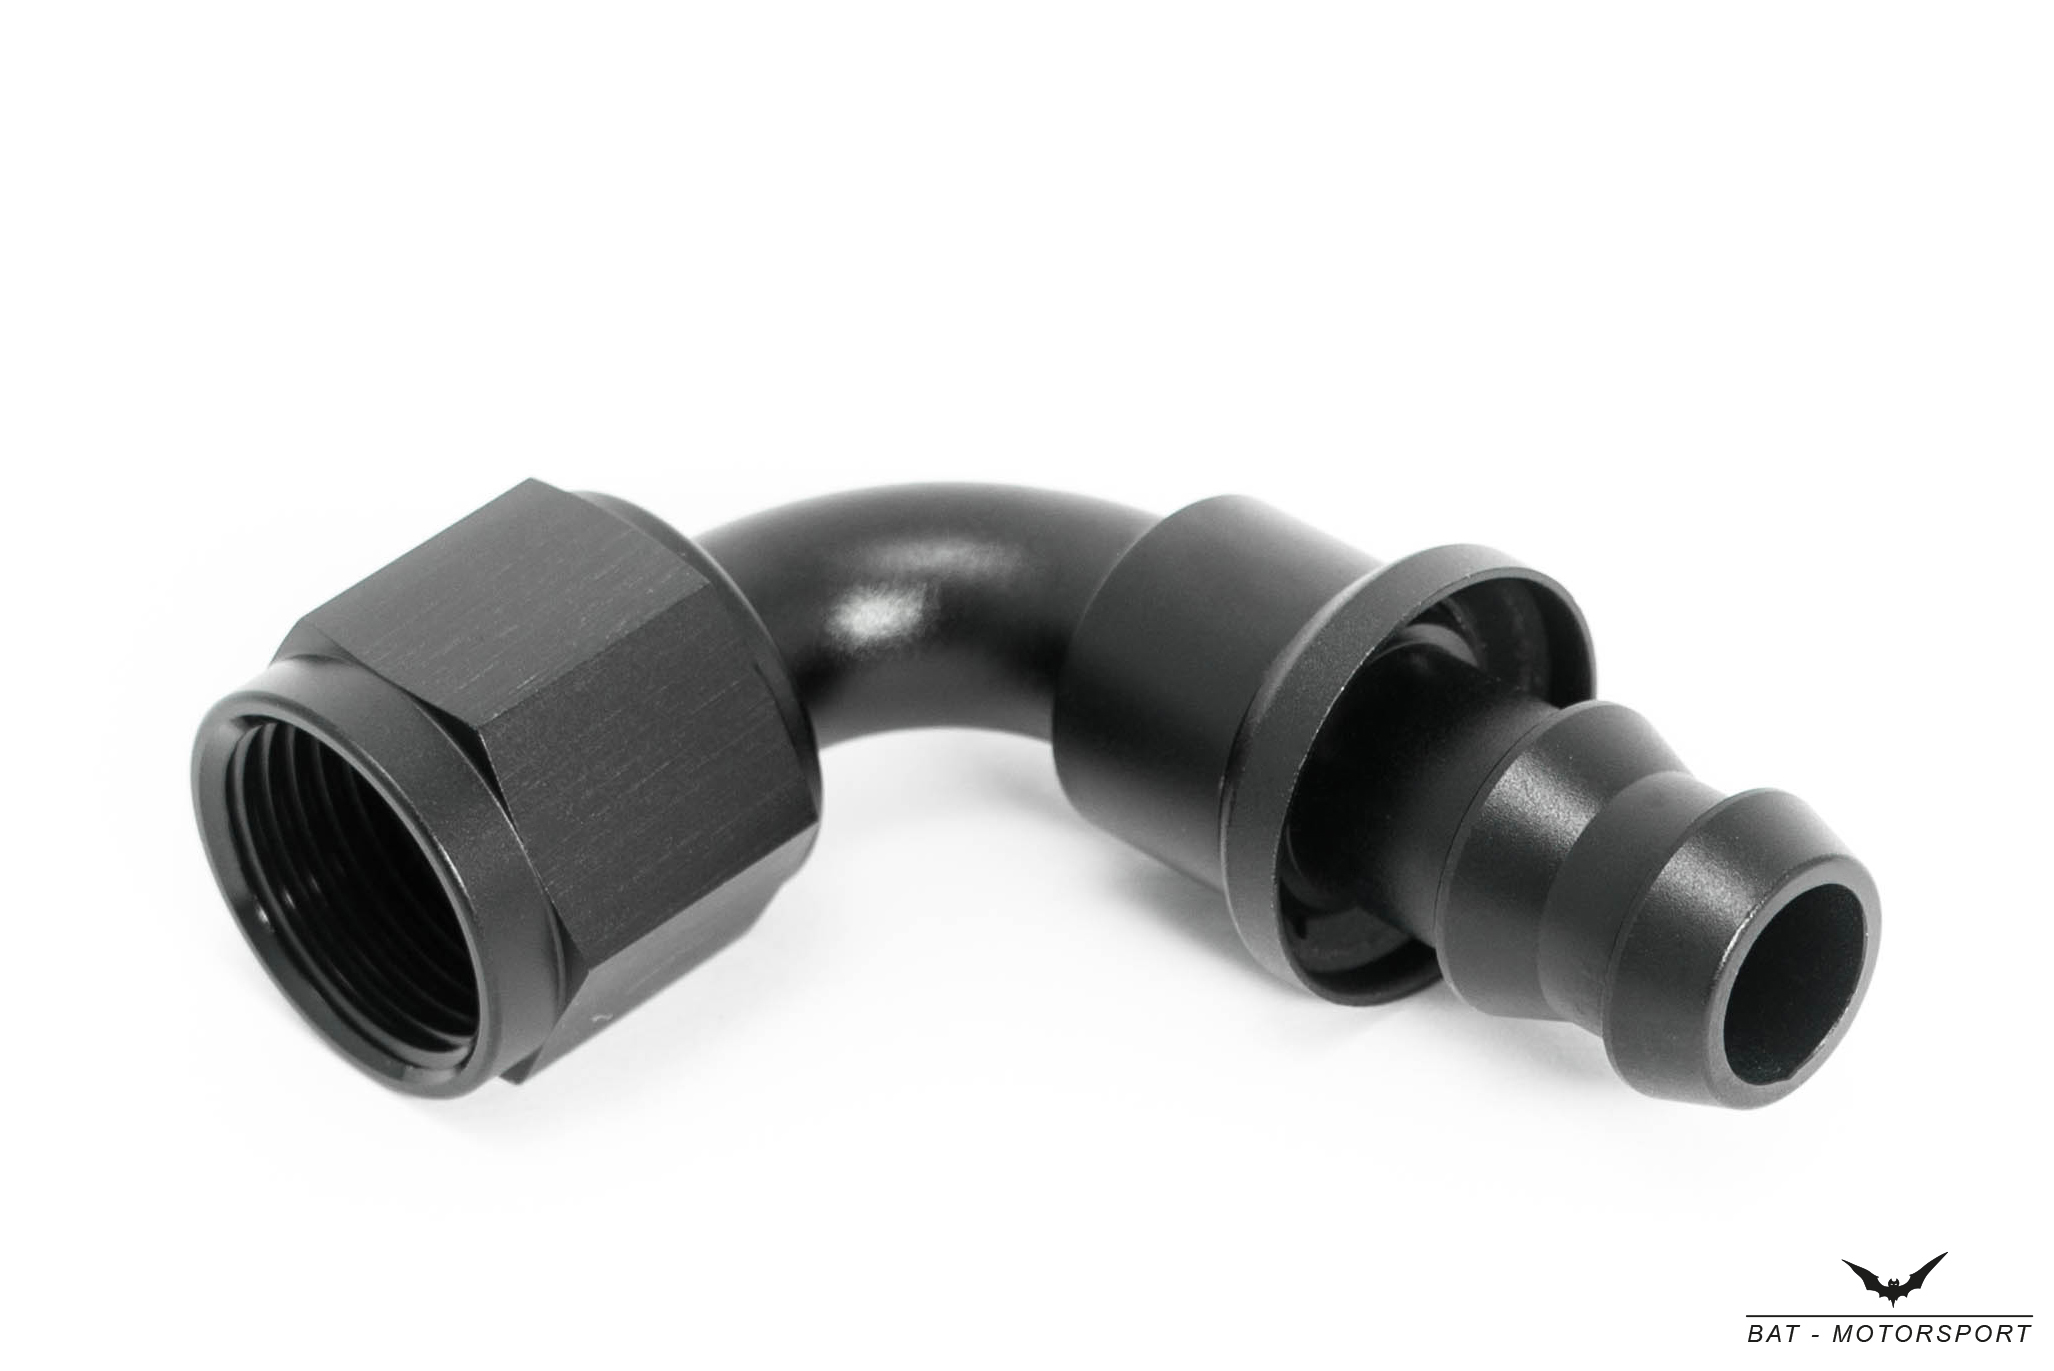 Nitril Rubber Hose Push-On Fittings